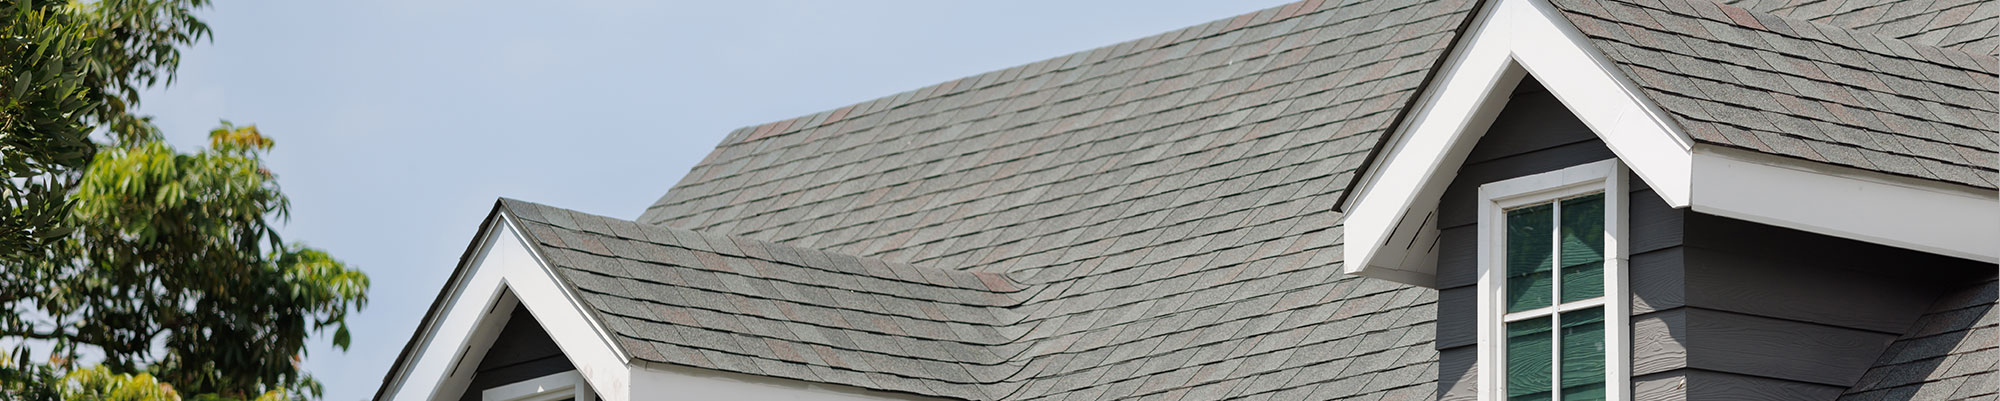 Franklin roof replacement company